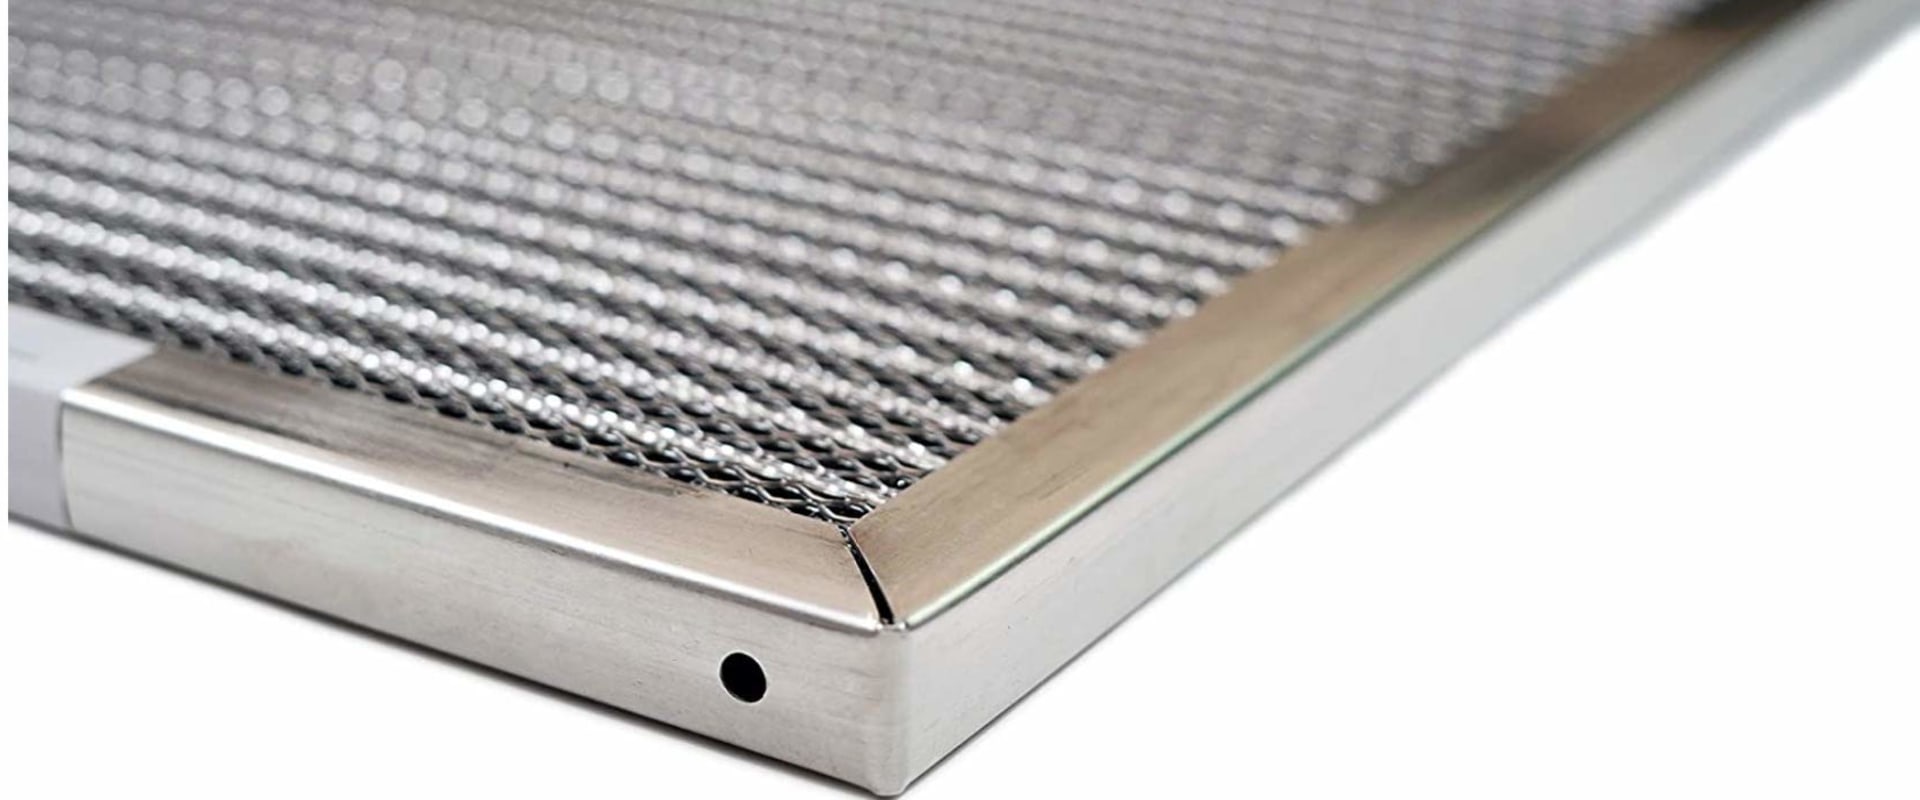 Everything You Need to Know About Electrostatic and Washable 20 x 20 x 1 Air Filters